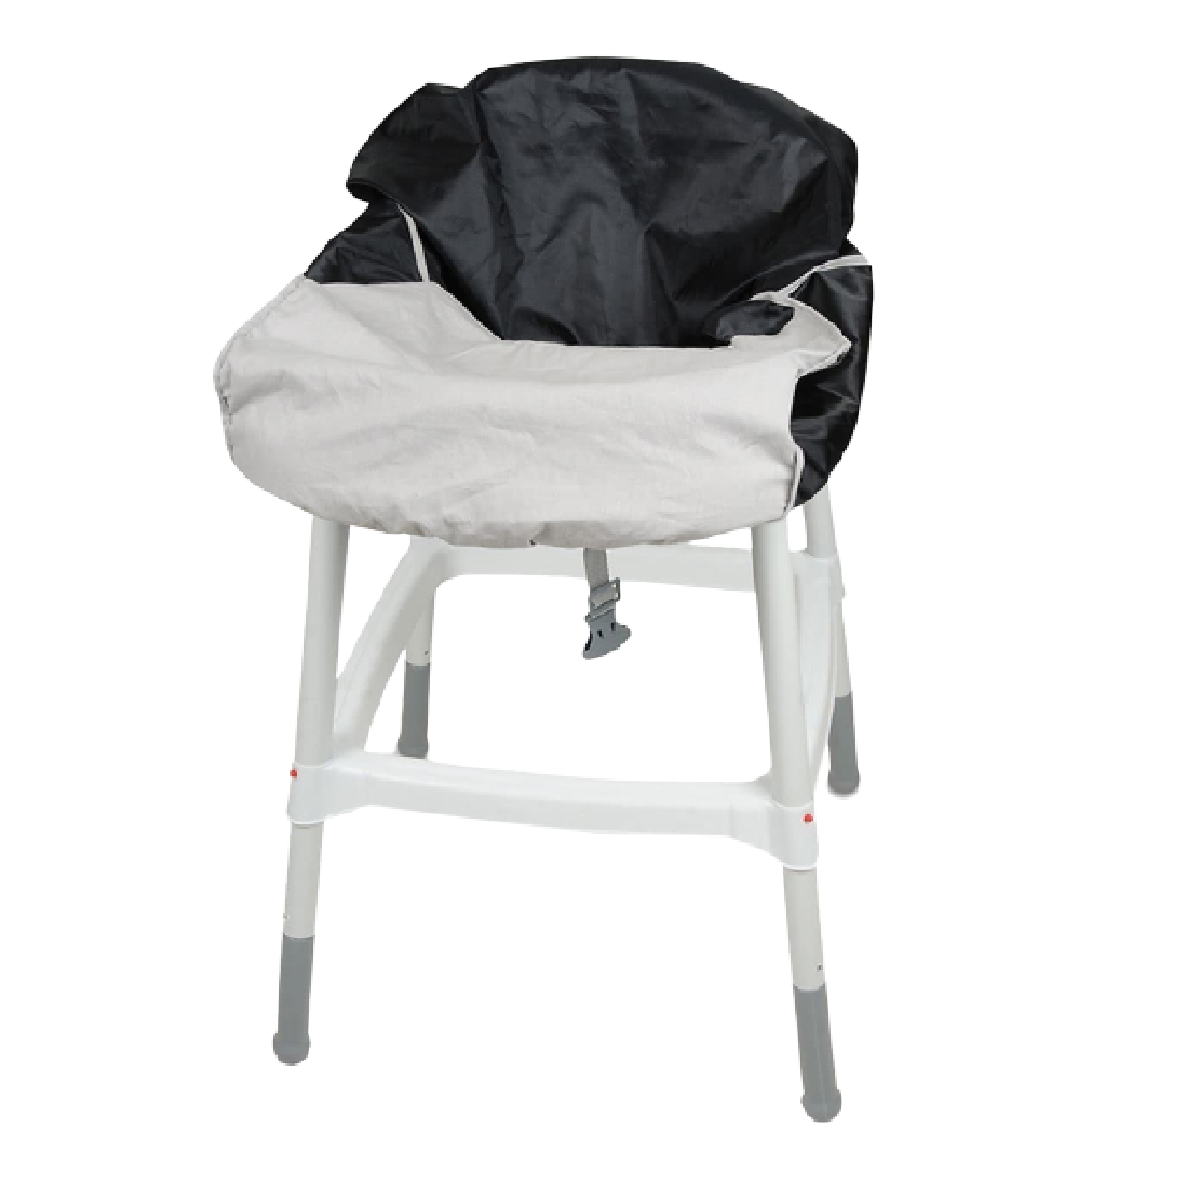 baby-store-dubai Ubeybi Shopping Trolley and High Chair Hygienic Cover - Black - Baby Shopping Cart Cover - Washable